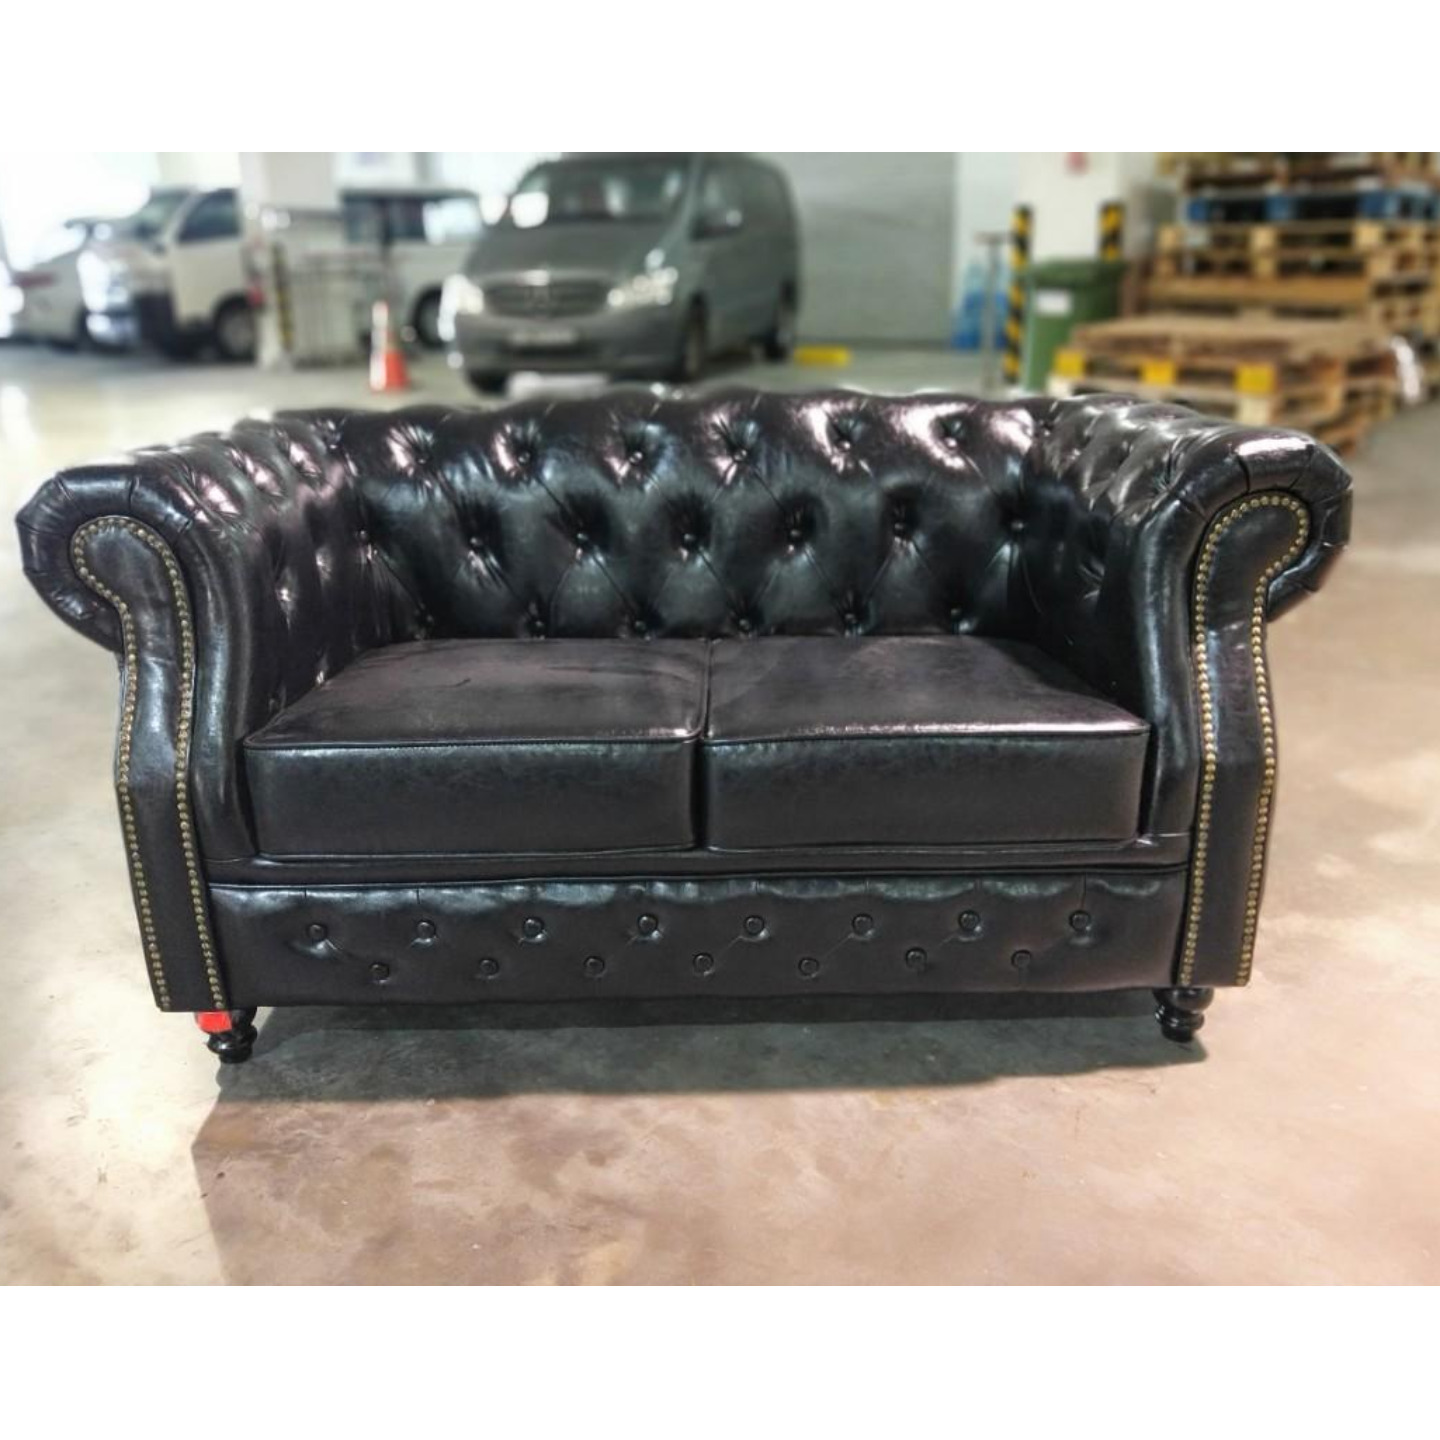 PRE ORDER BOTTEVA 2 Seater Chesterfield Sofa in GLOSS BLACK PU - Estimated Delivery by JULY 2023